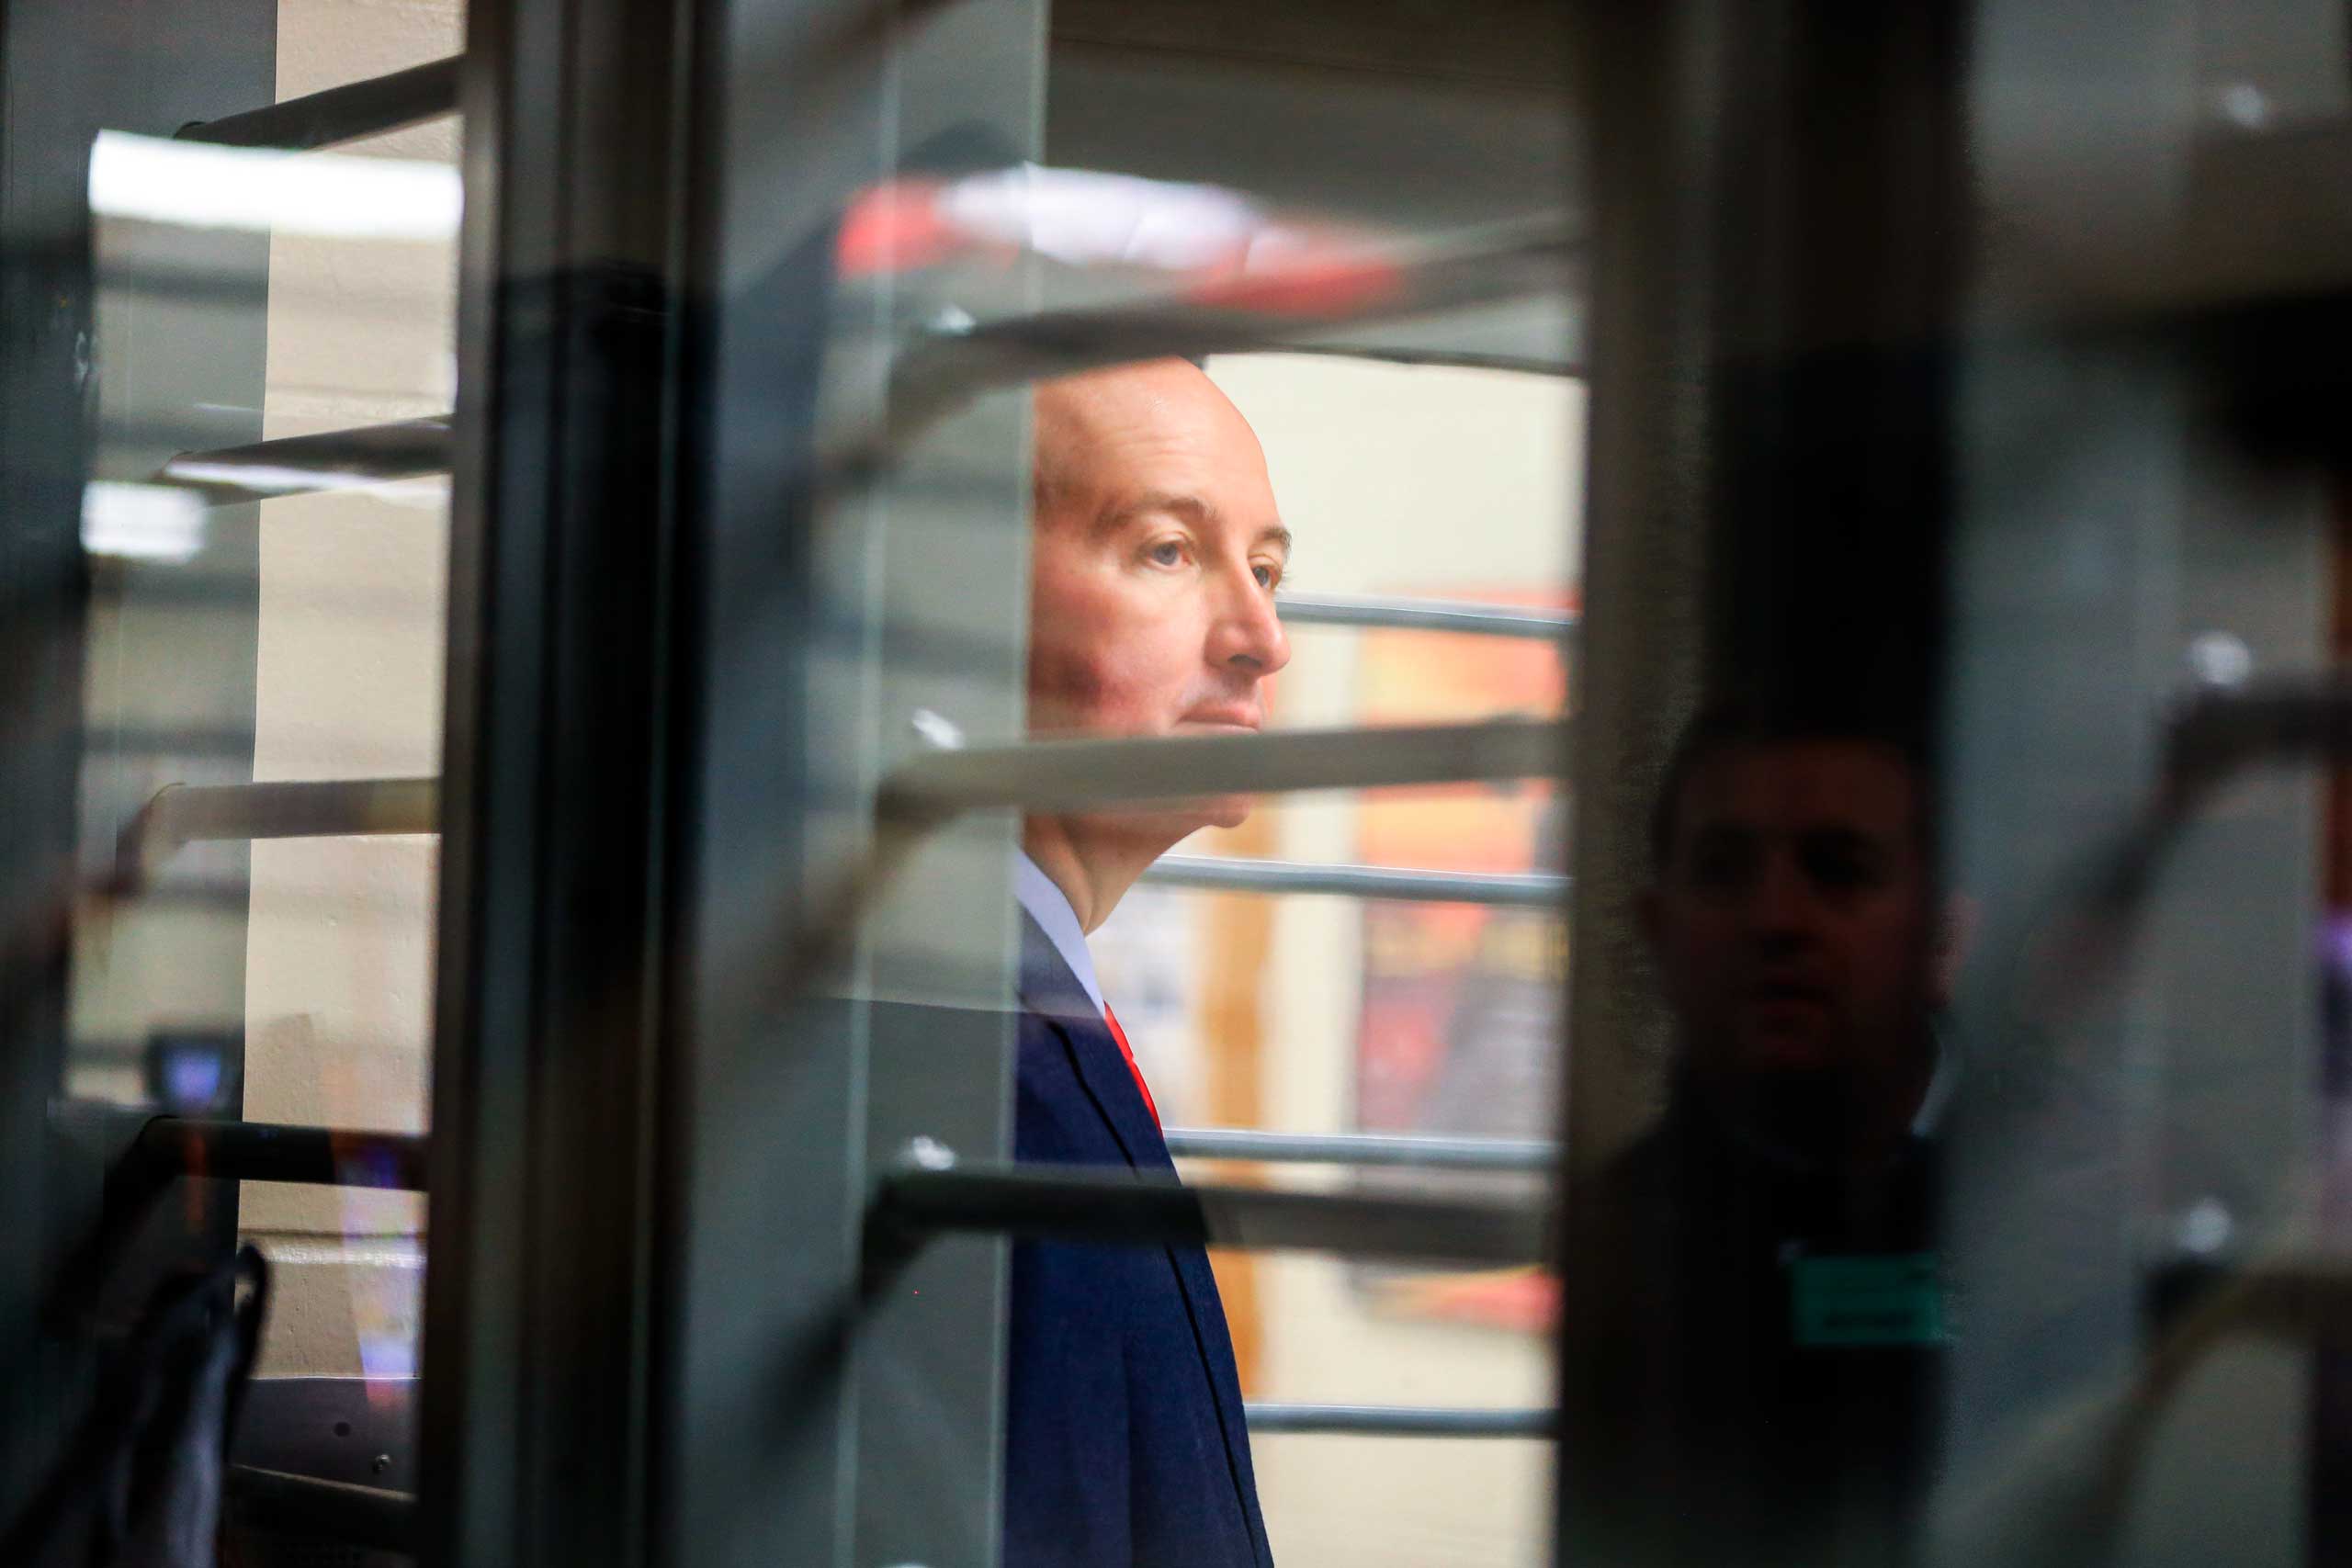 Nebraska Gov. Pete Ricketts is seen through bars during a tour of the Tecumseh State Correctional Institution in Tecumseh, Neb., on May 19, 2015.